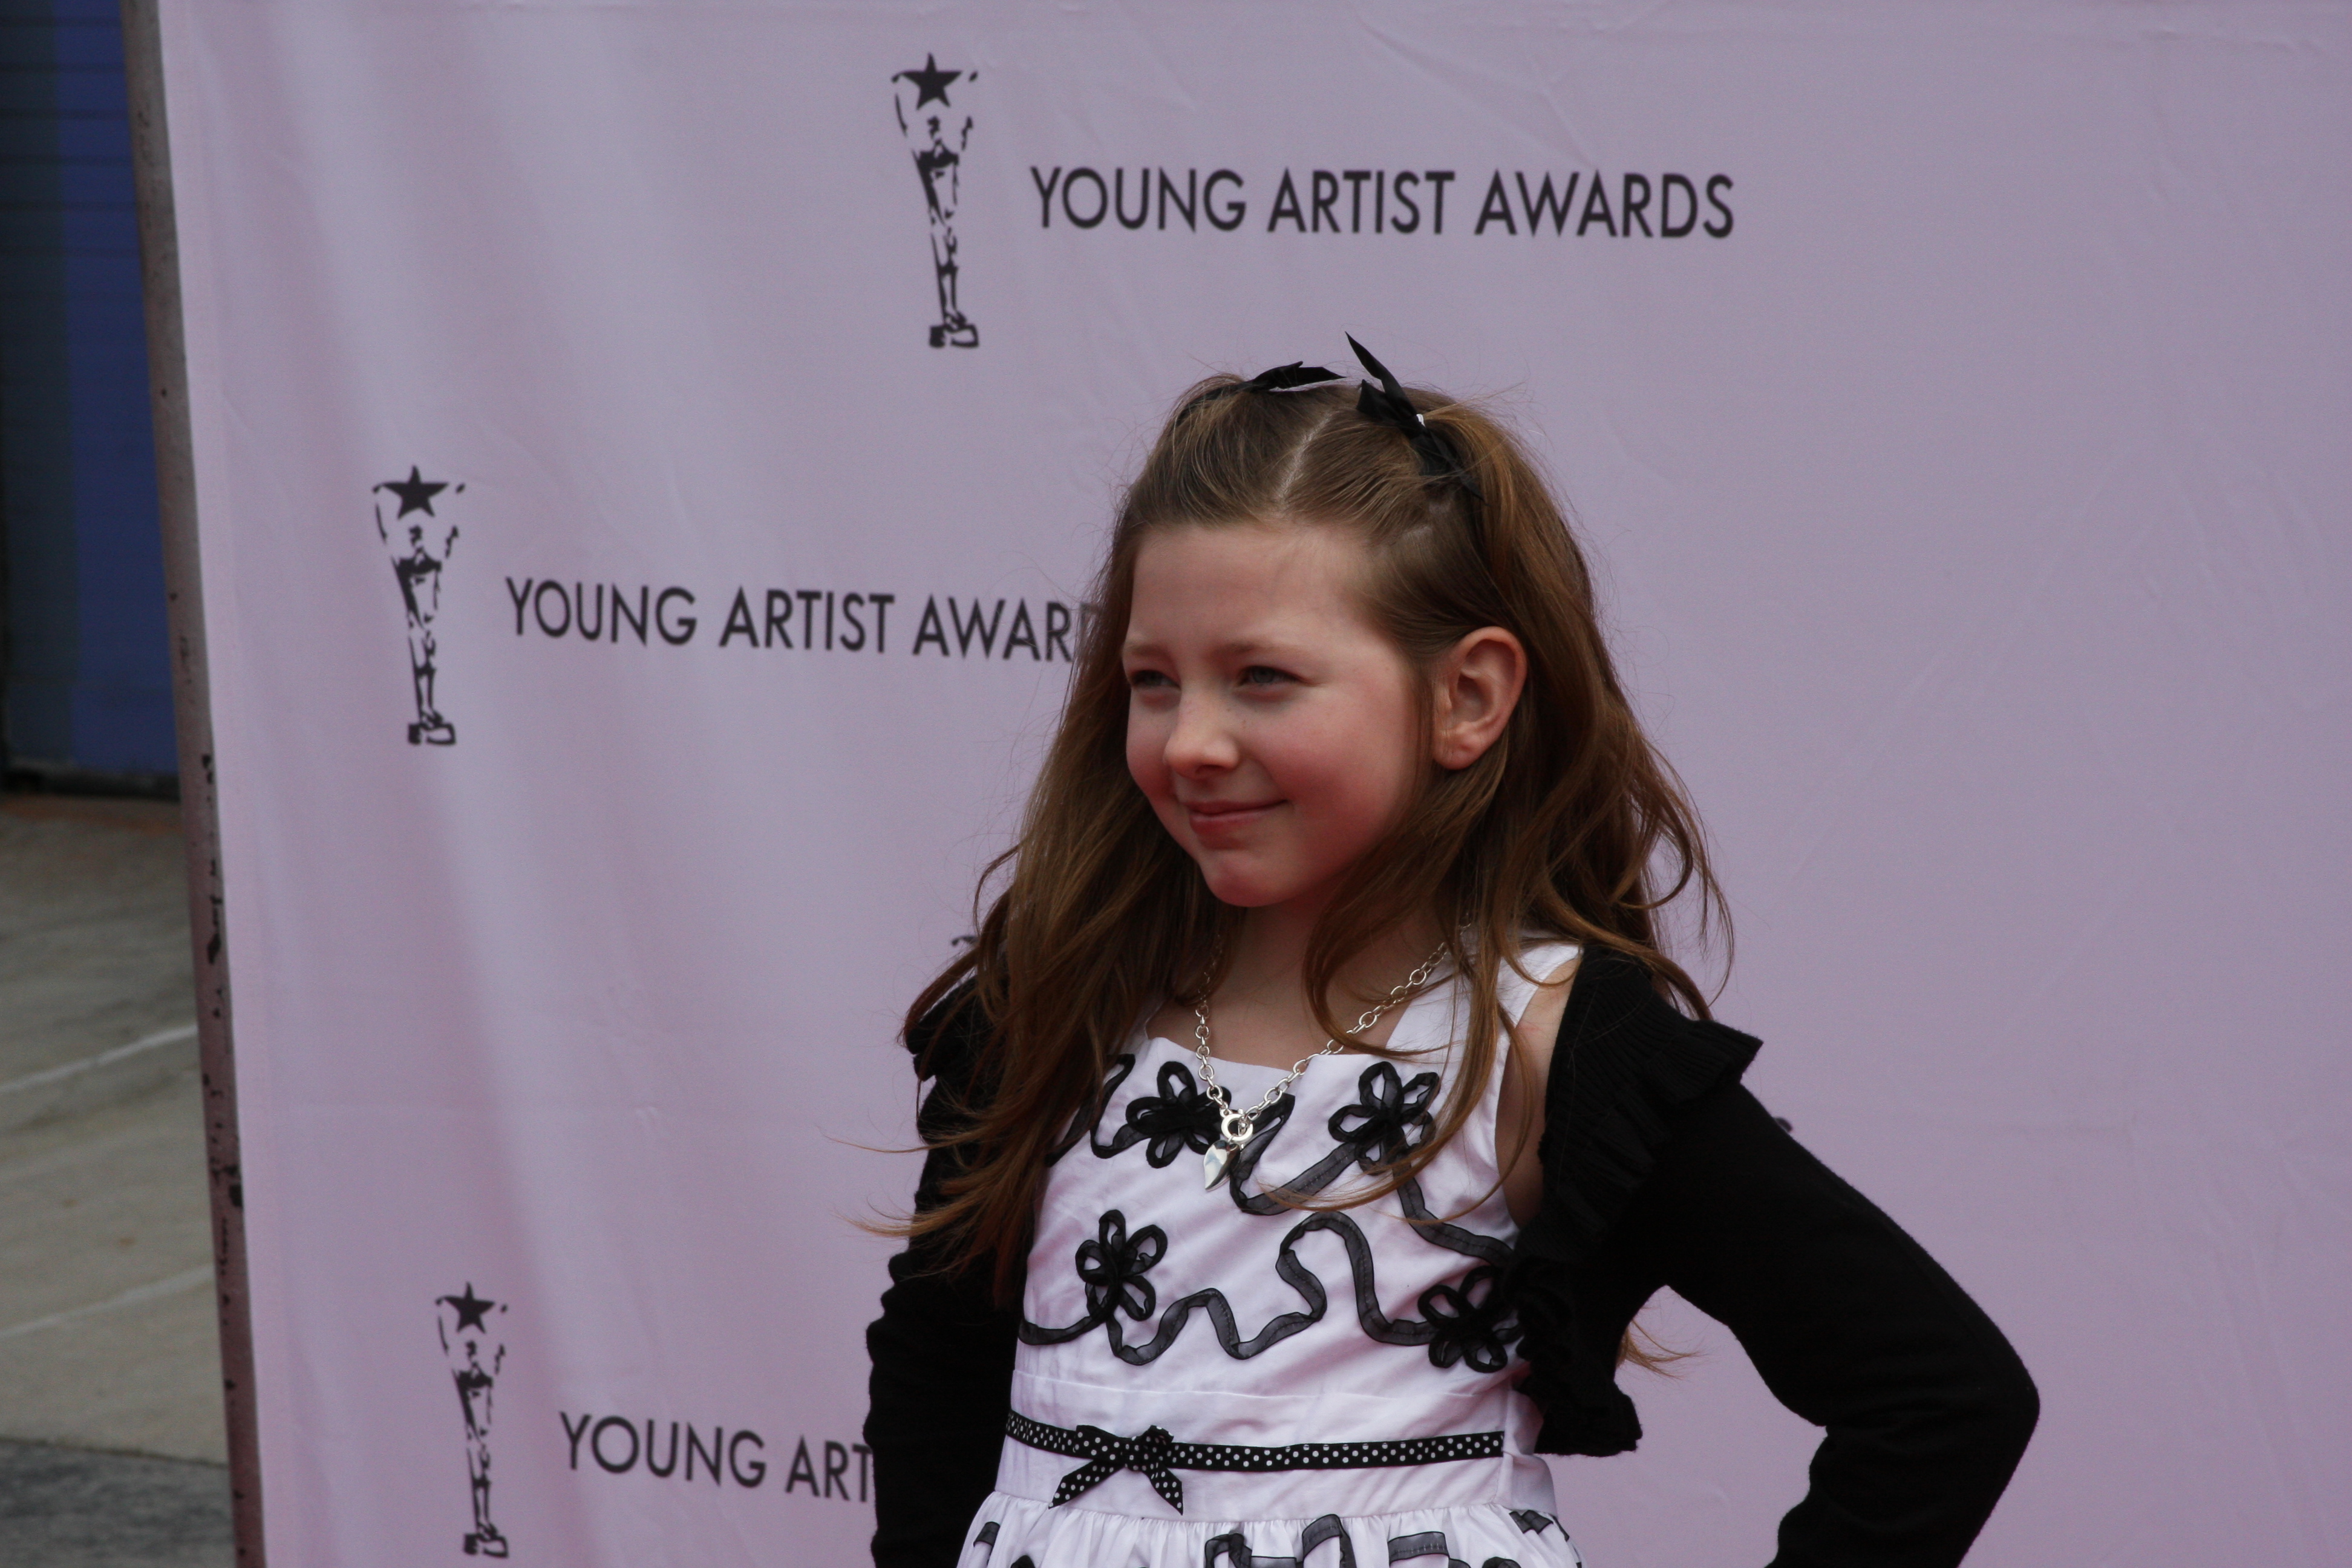 Chelsey Valentine at the March 2009 Young Artist Awards Nominee for Best Performance in a Short Film.